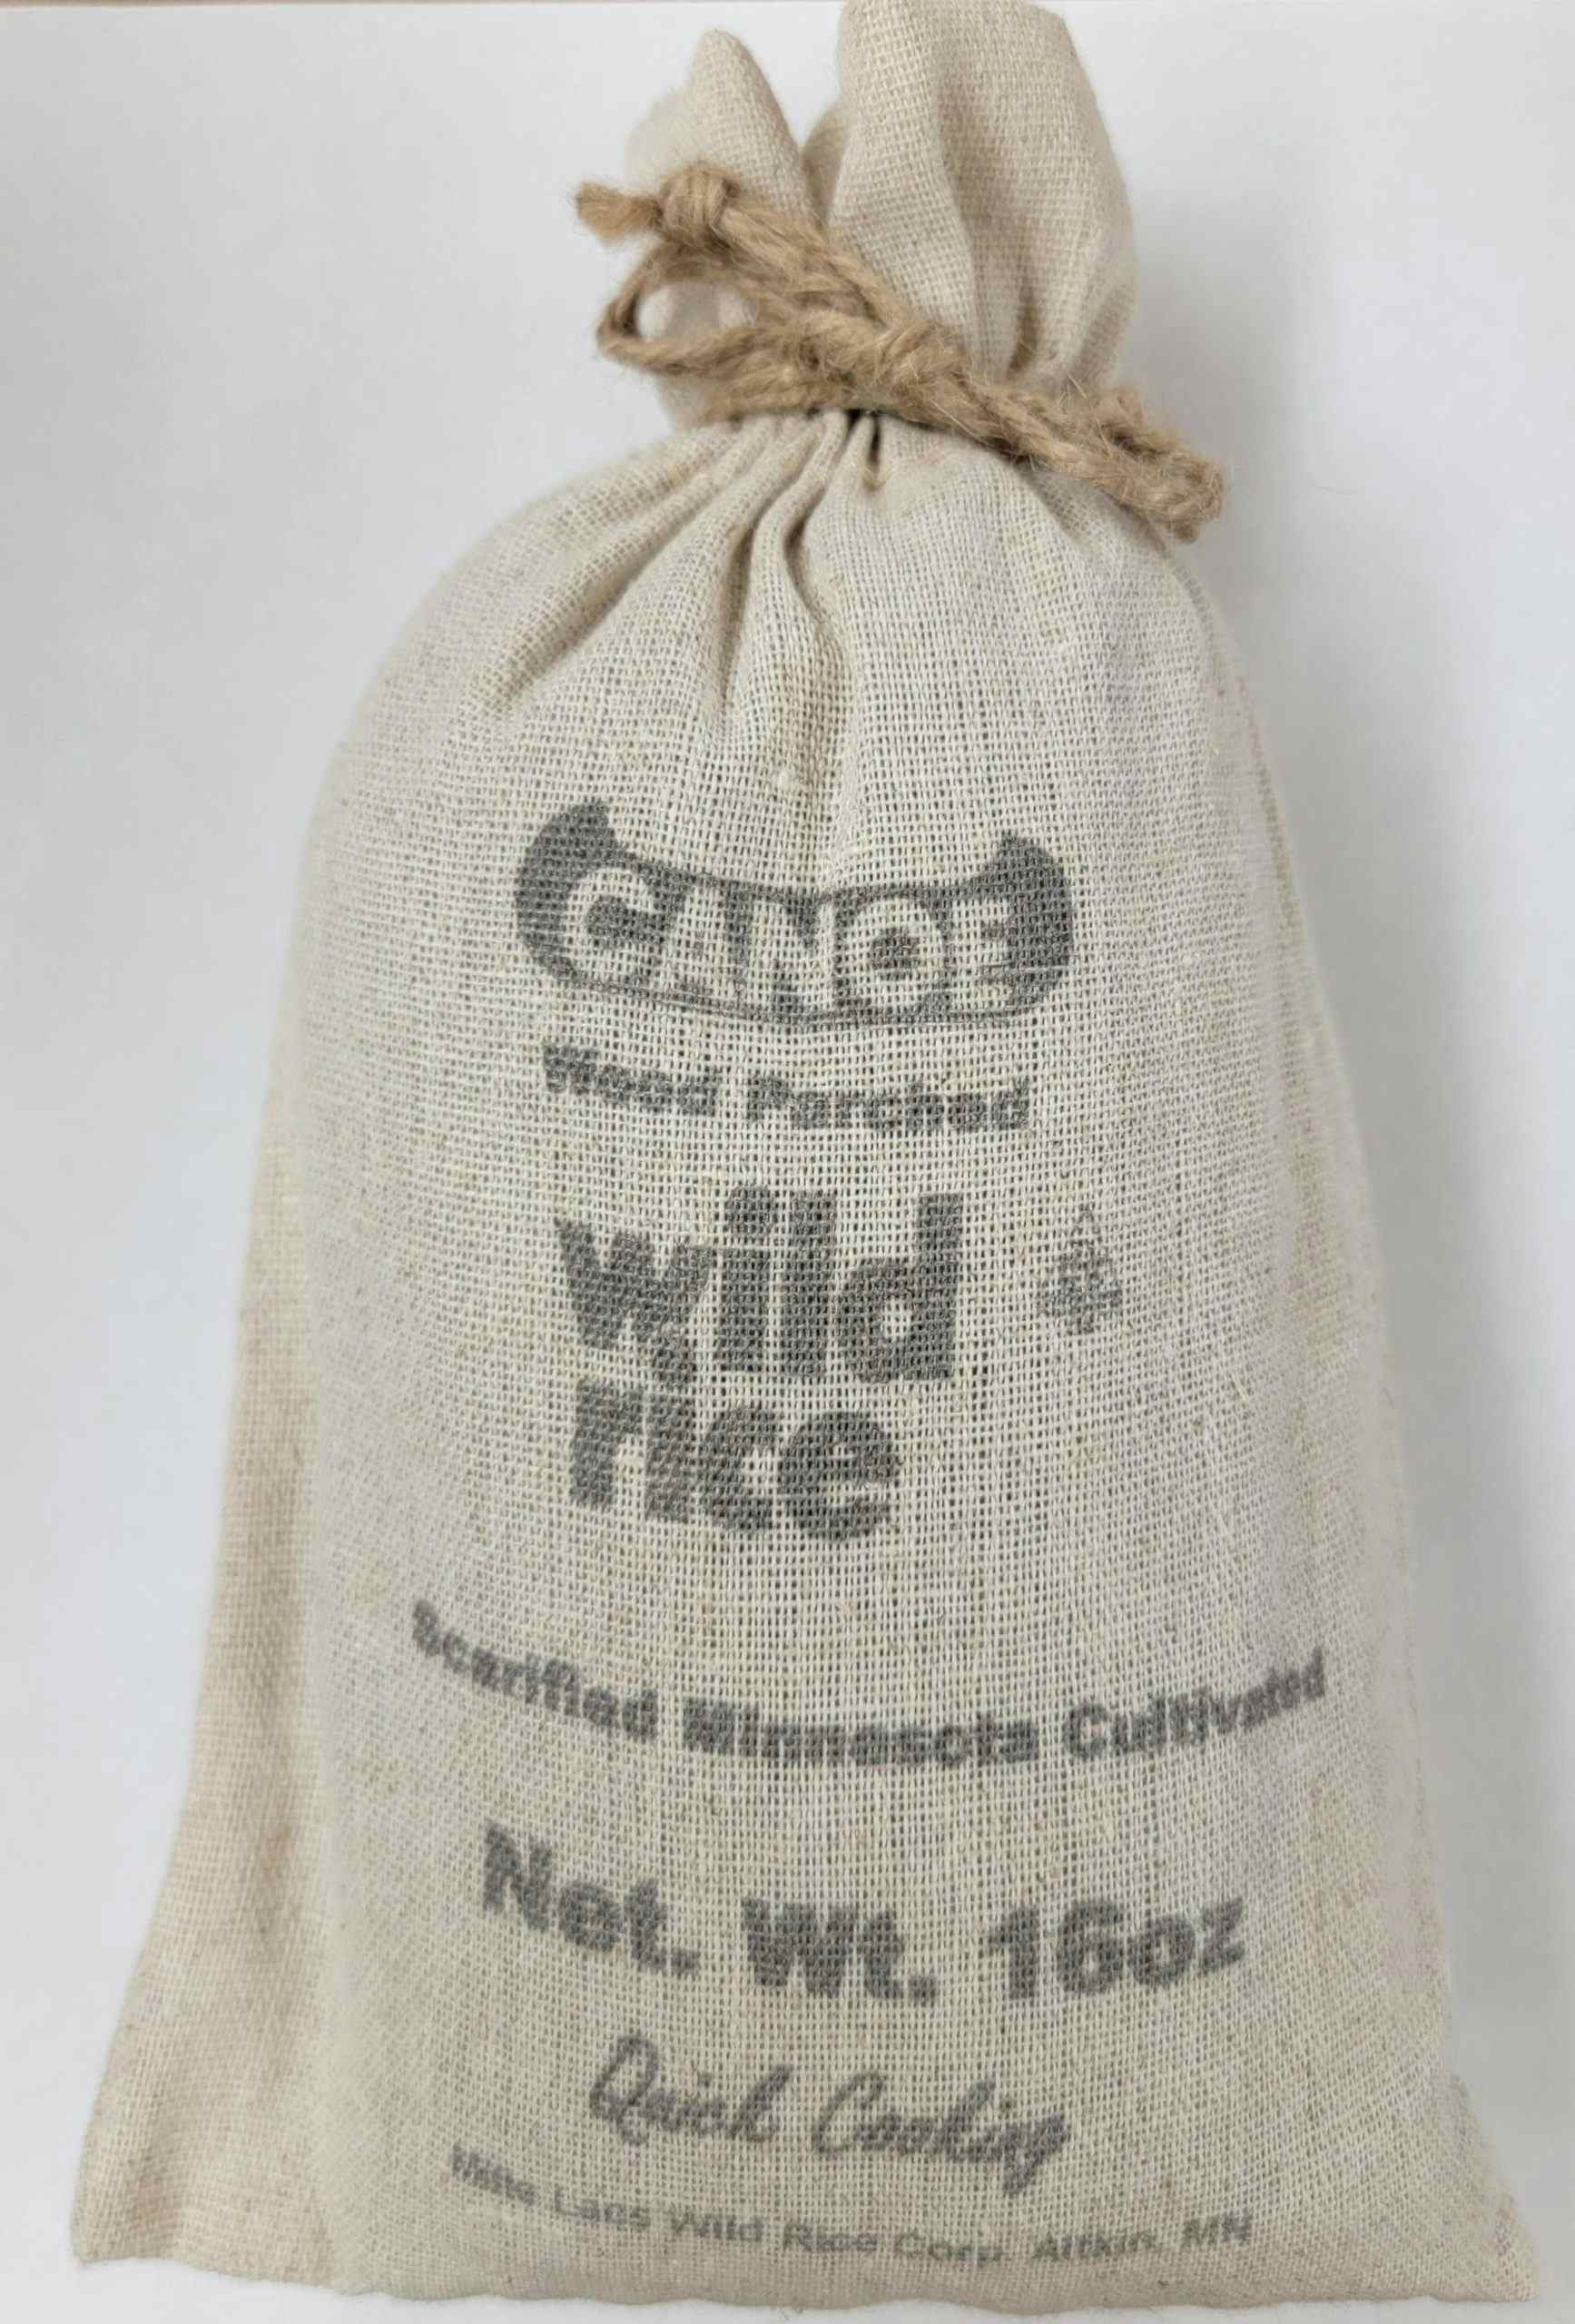 3lbs of Wood Parched Cultivated Wild Rice - Quick Cook Whole Grain